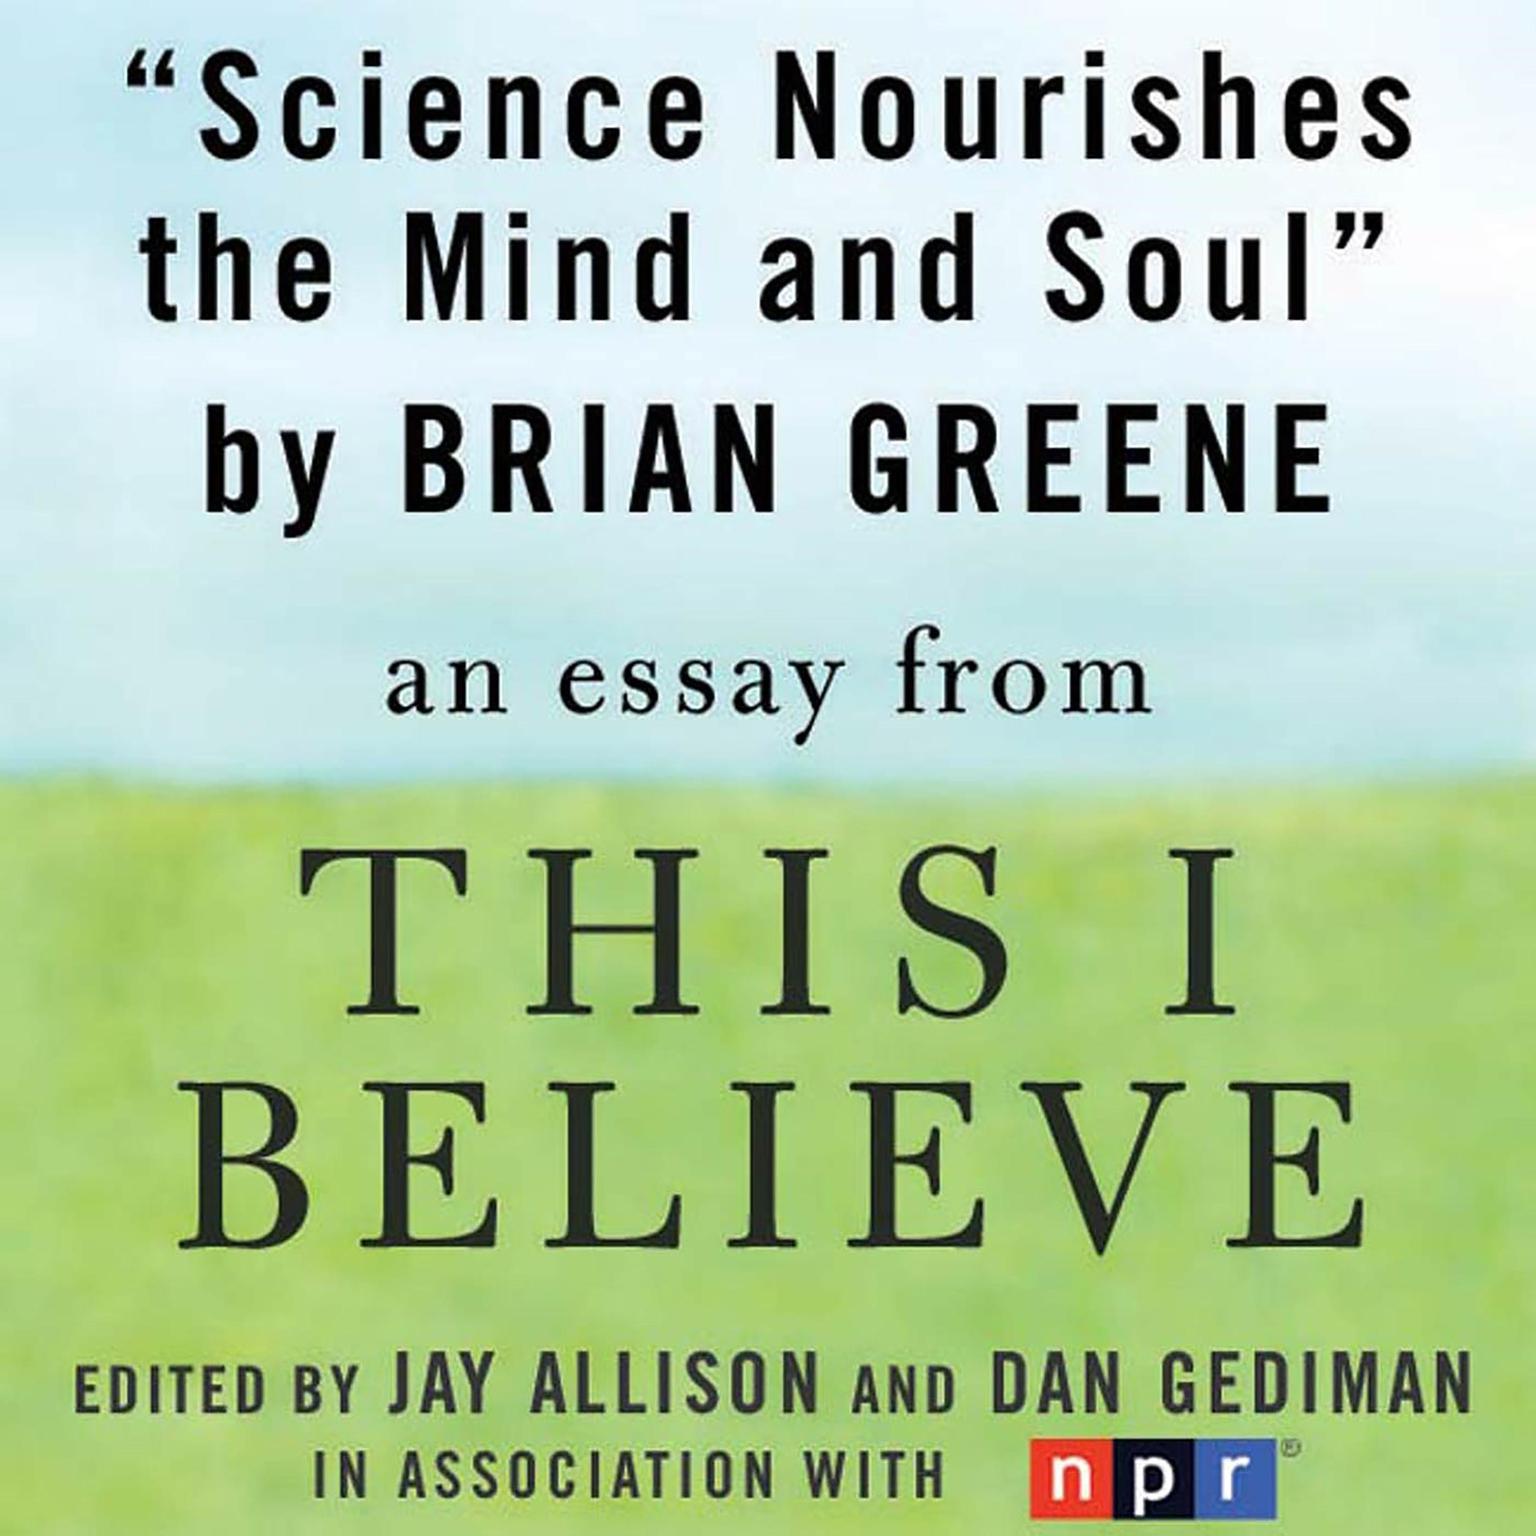 Science Nourishes the Mind and Soul: An Essay from This I Believe Audiobook, by Brian Greene